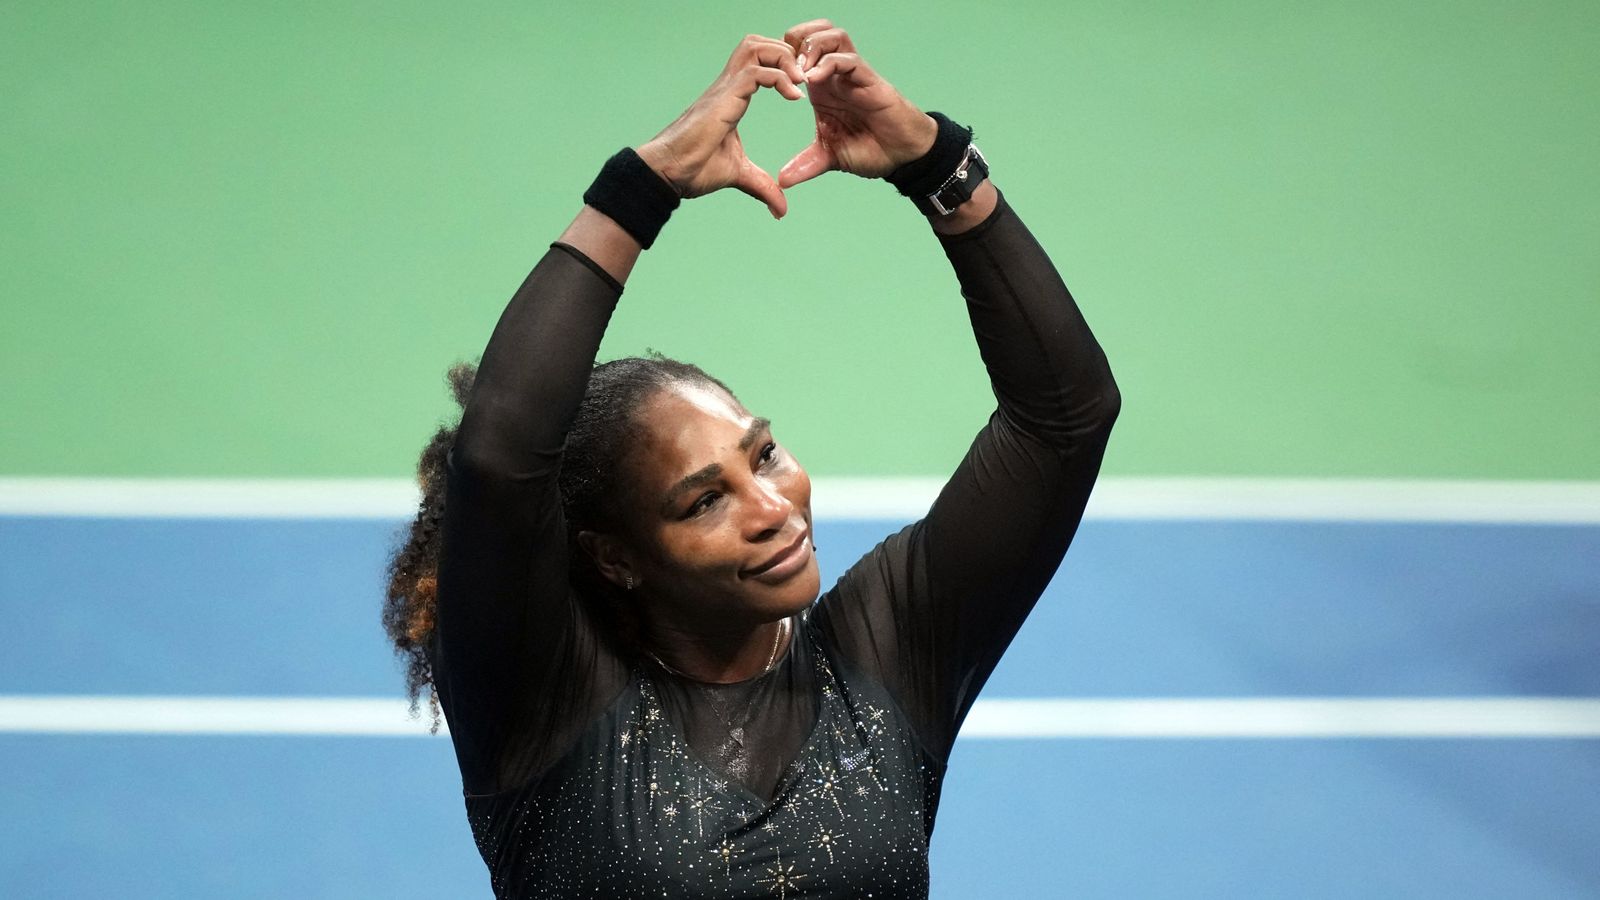 Serena Williams says she has 'not retired' from tennis and chances of a return are 'very high'